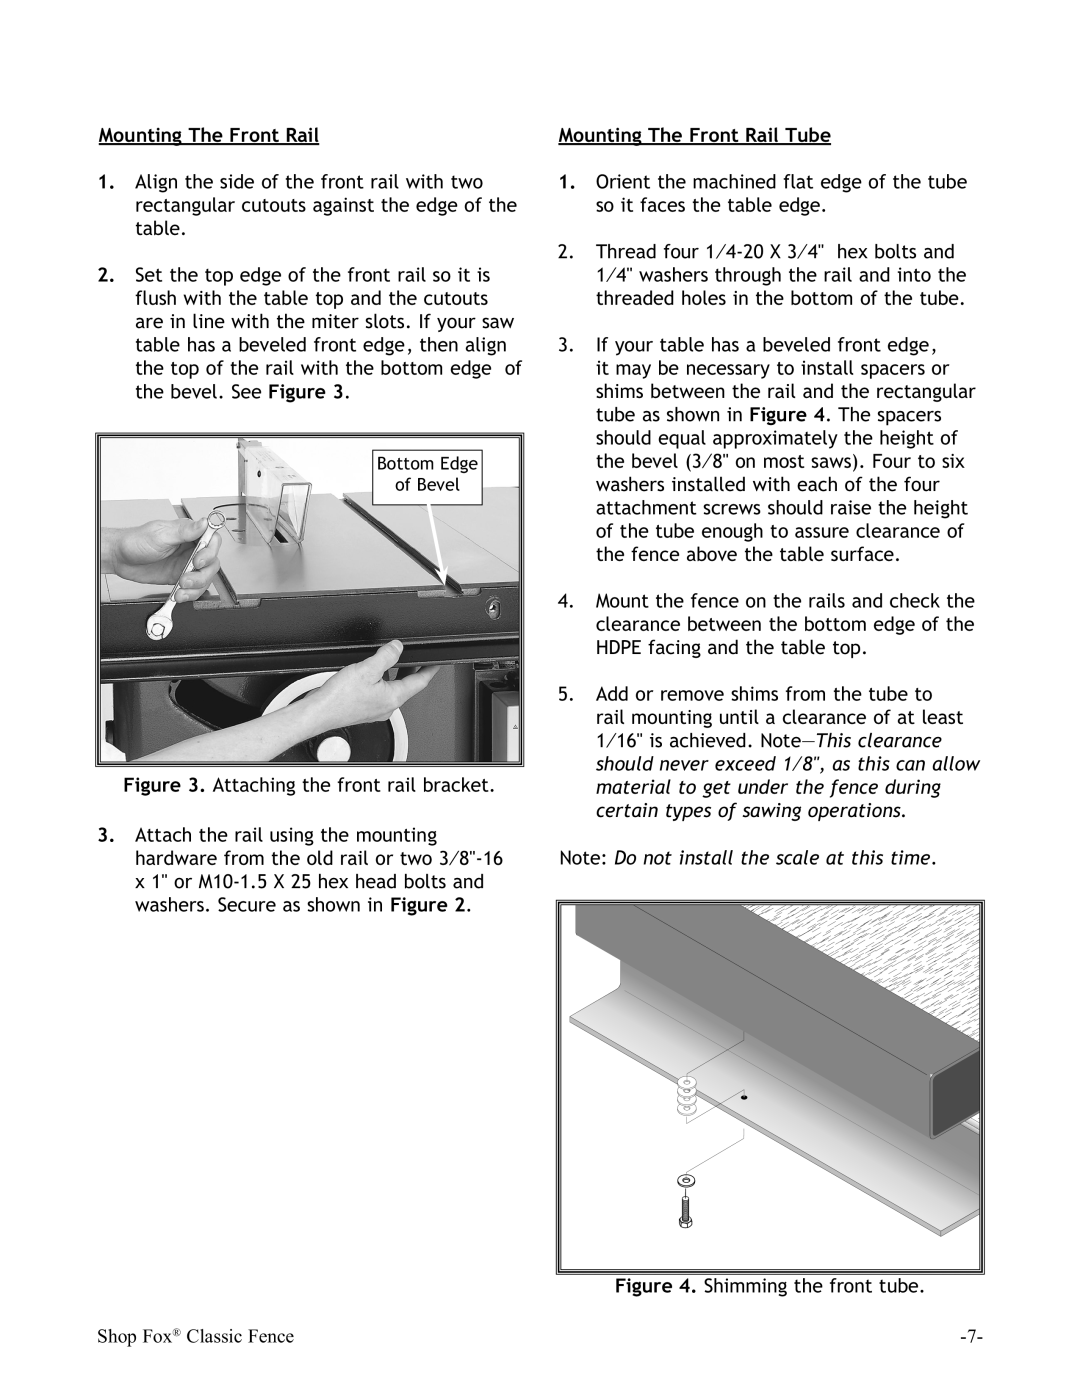 Woodstock W2005 instruction manual Mounting The Front Rail Tube, Note Do not install the scale at this time 